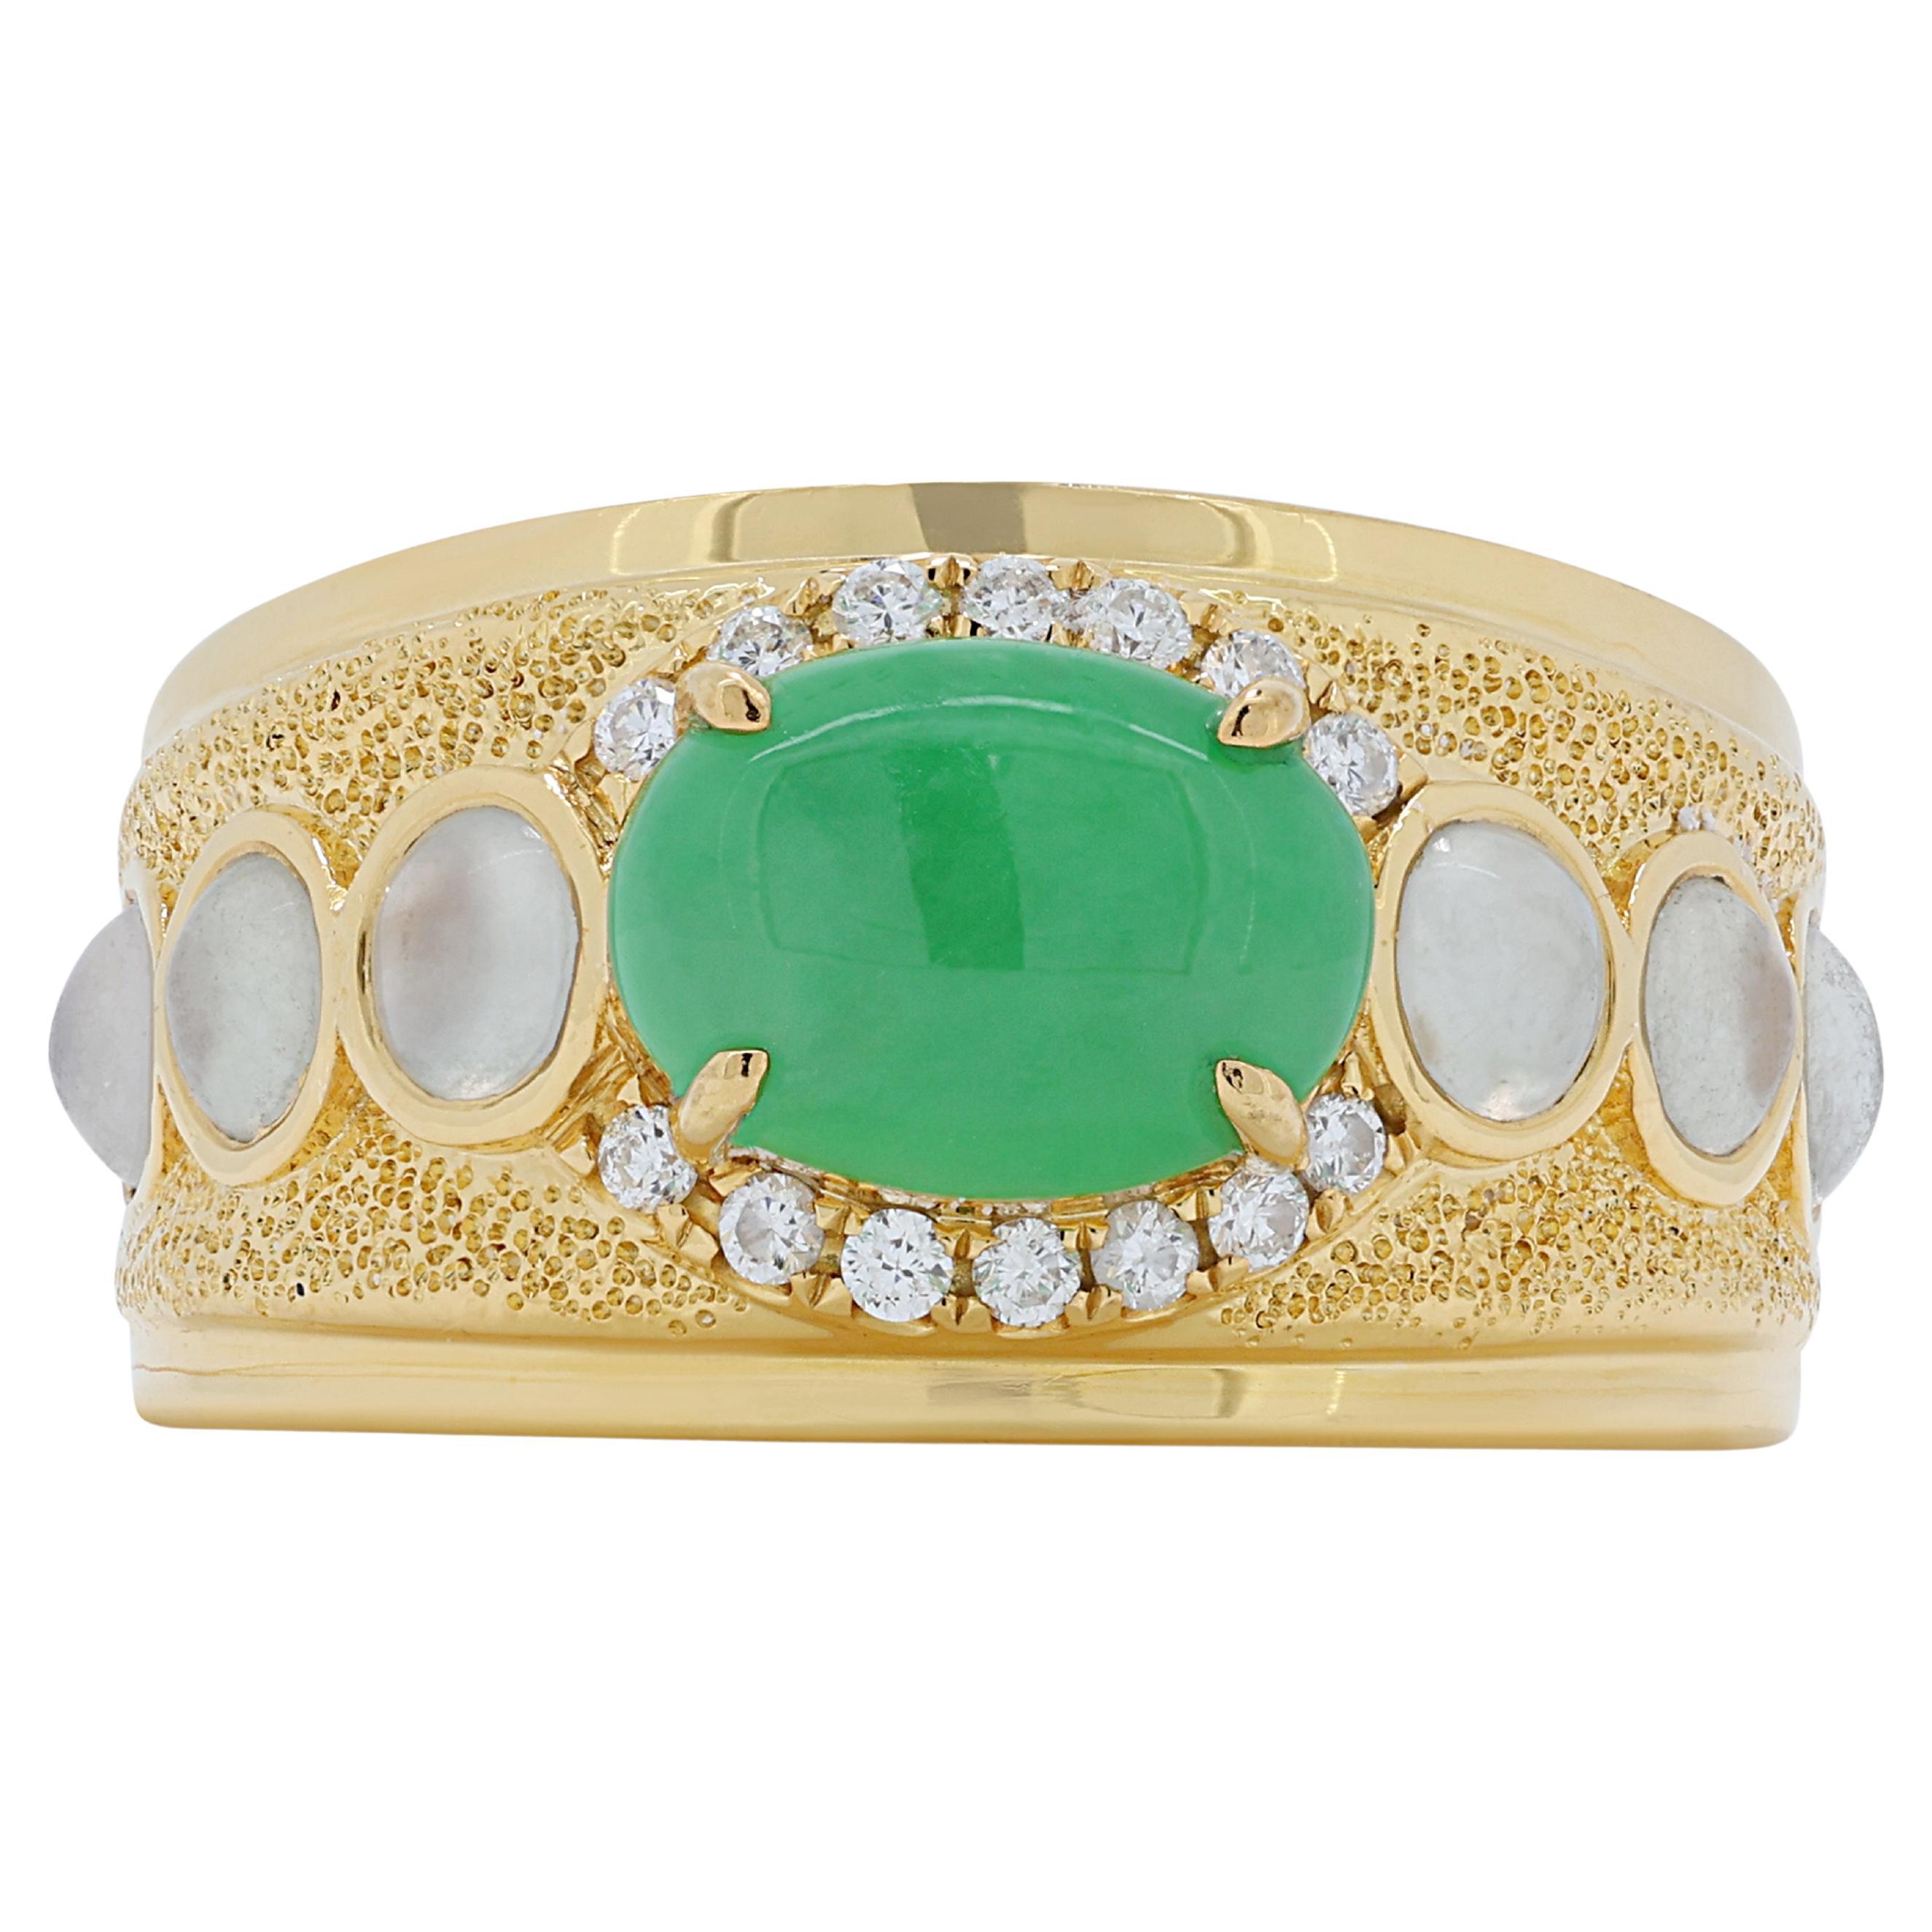 Stunning 2.24ct Jade Dome Ring in 18K Yellow Gold with Diamonds